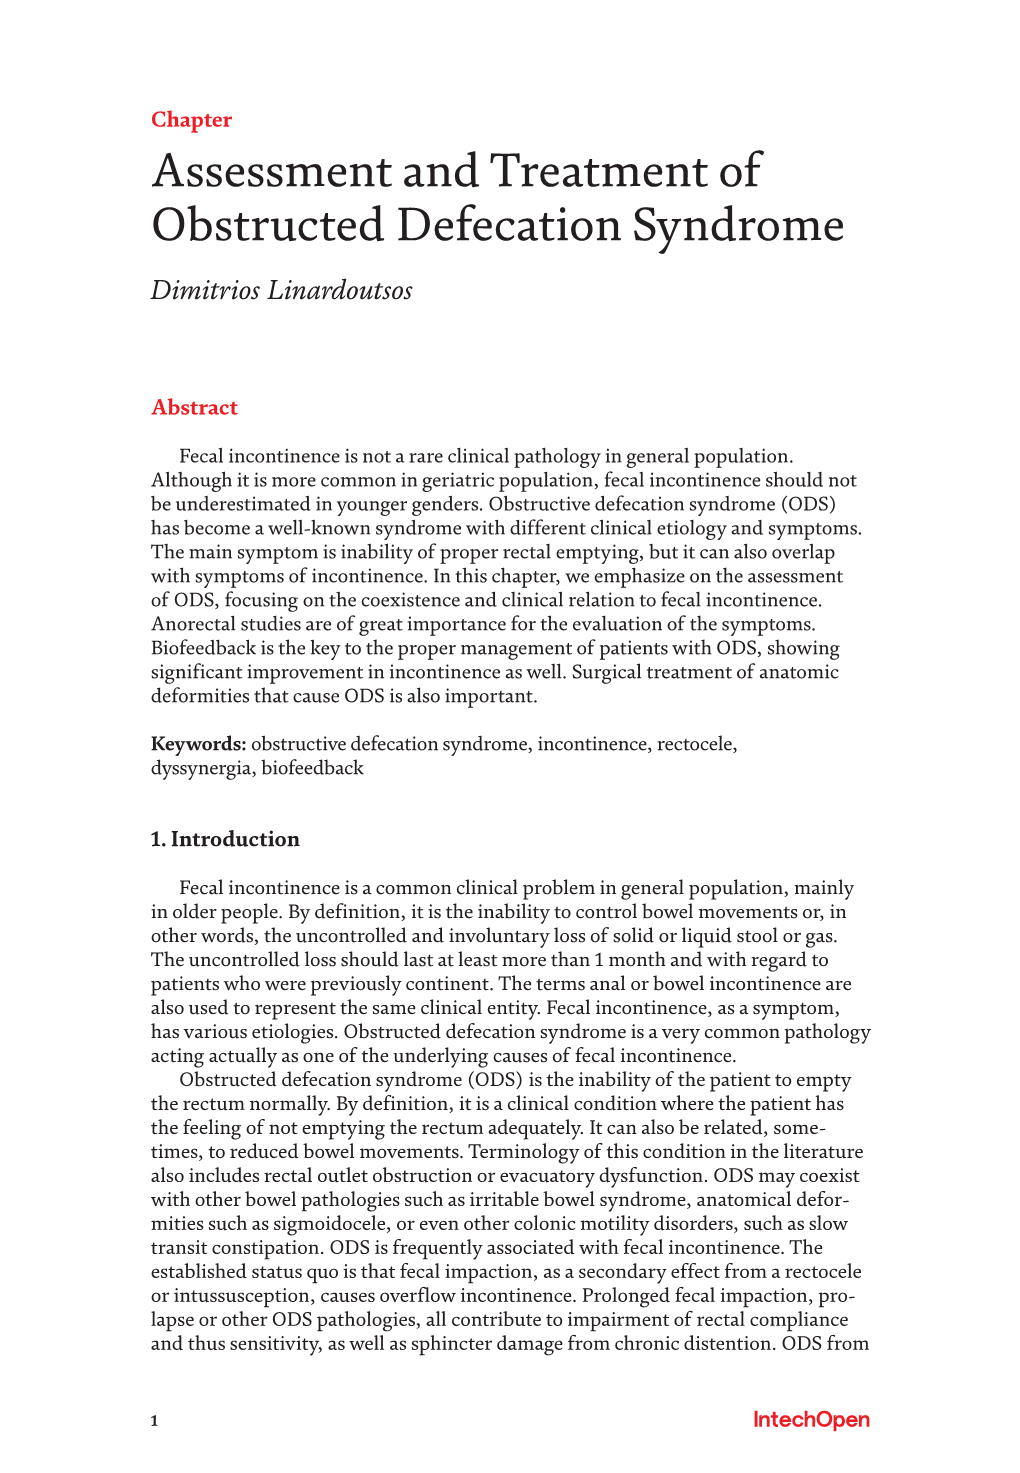 Assessment and Treatment of Obstructed Defecation Syndrome Dimitrios Linardoutsos